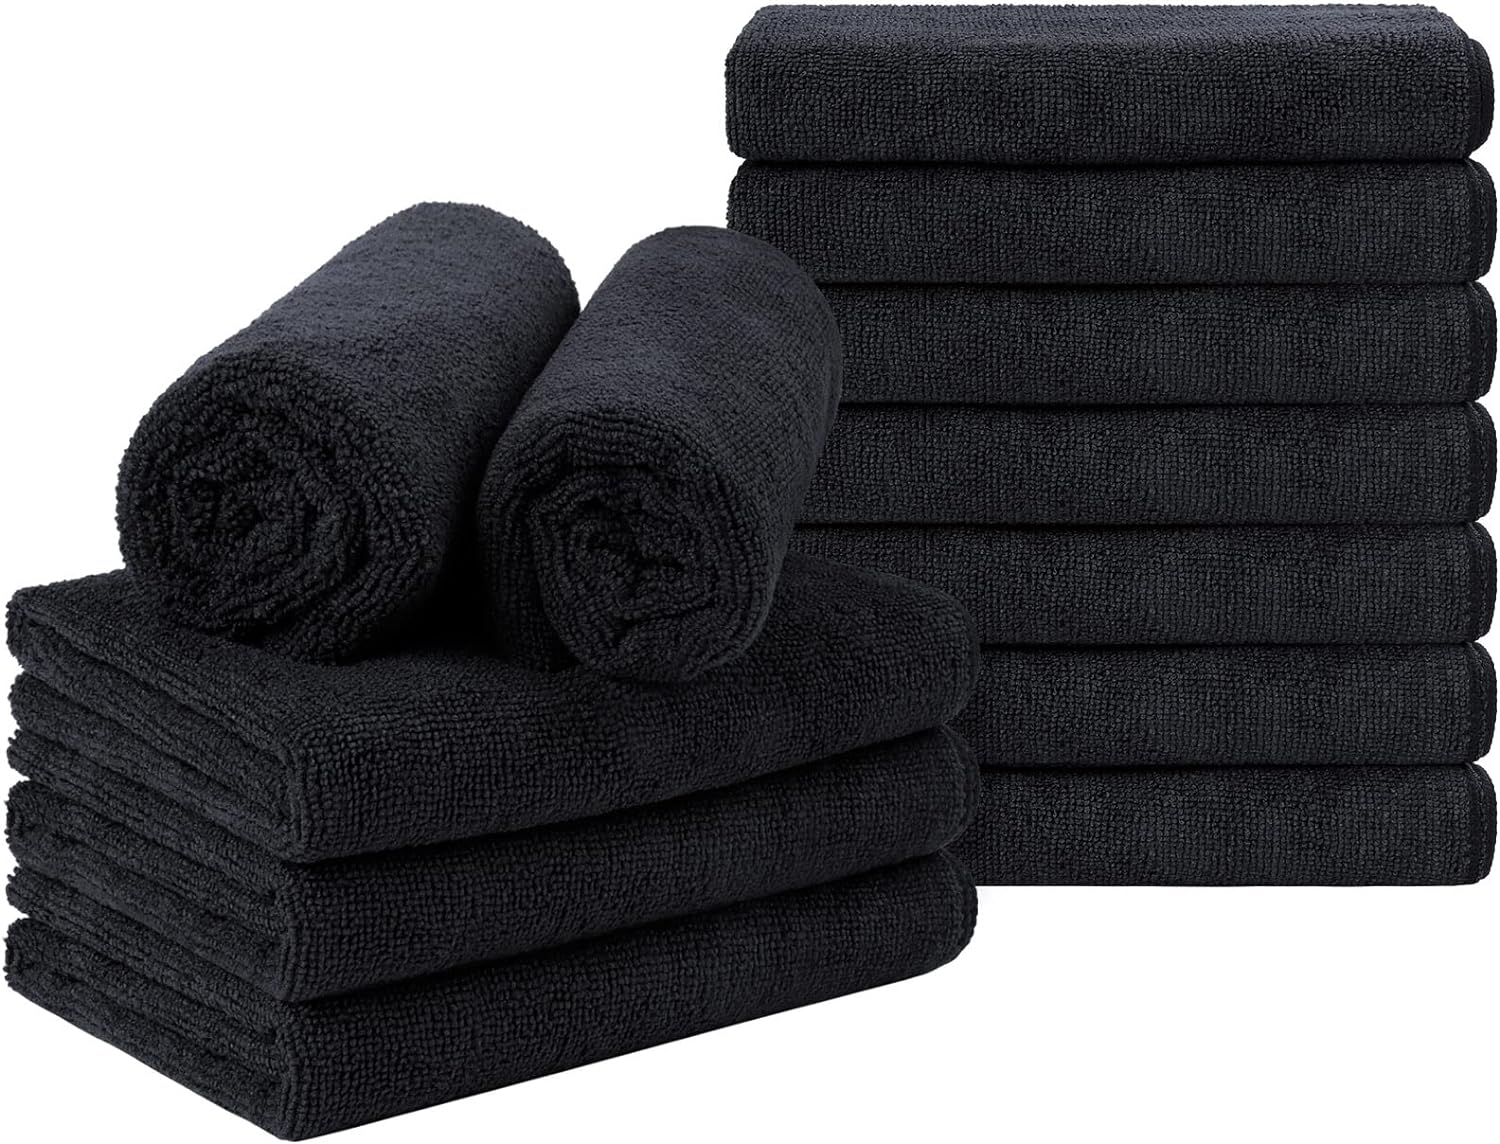 Black Salon Towel, Pack of 12(Not Bleach Proof, 16 X 27 Inches) Super Soft and Absorbent Microfiber Towels for Salon, Hand, Gym, Bath, Spa and Home Hair Care